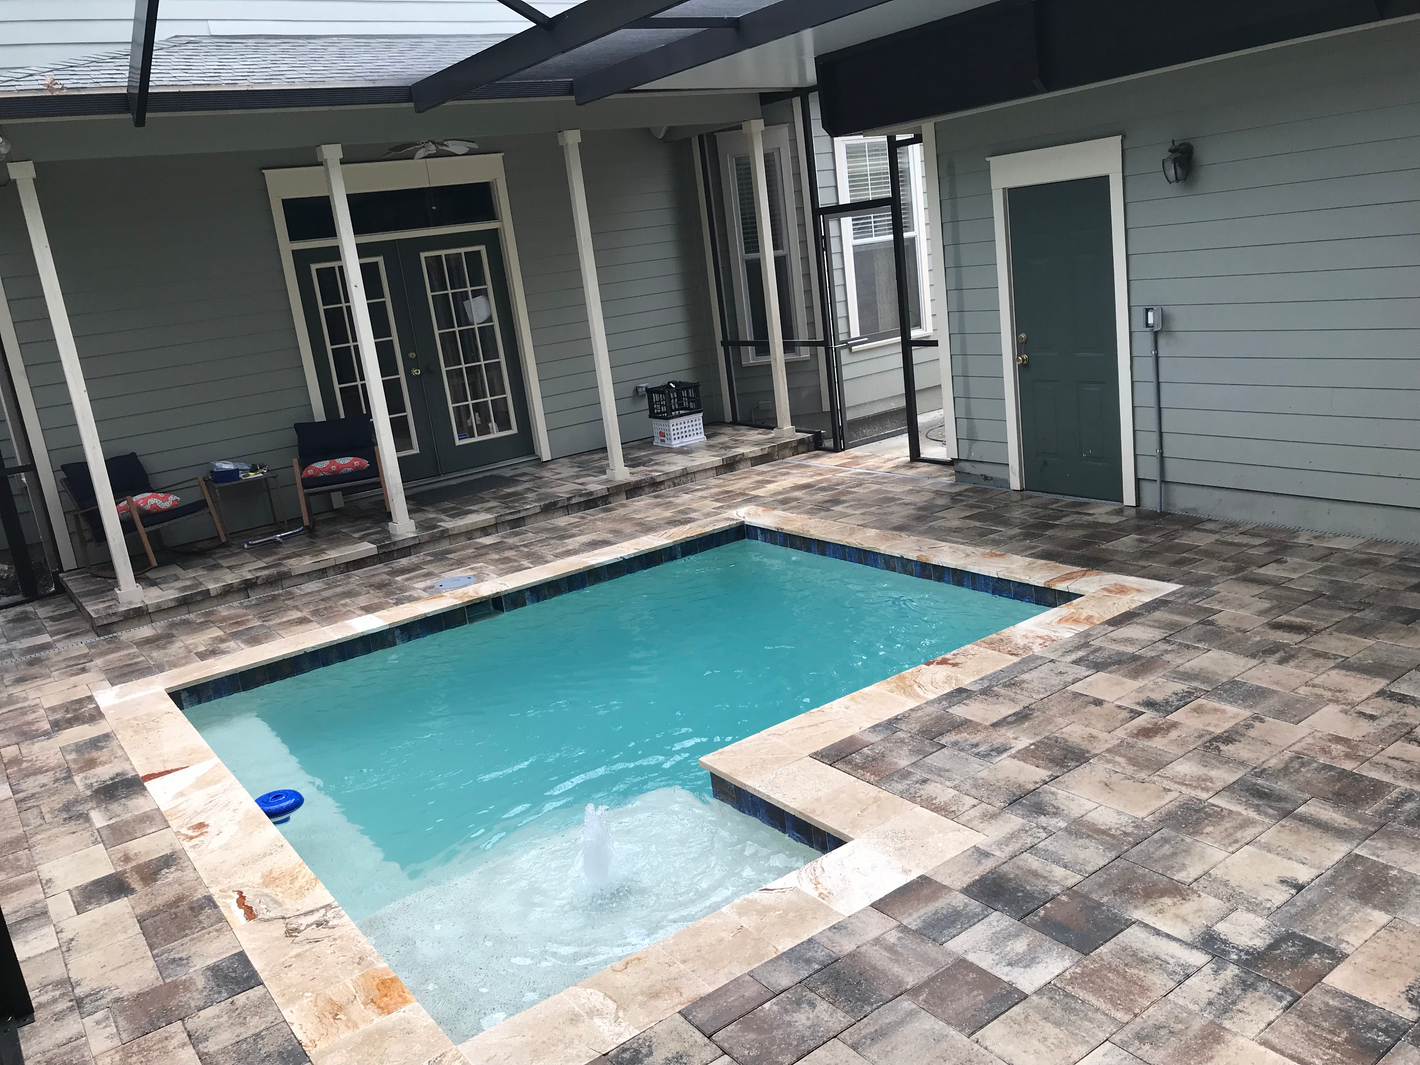 Paver and travertine pool deck and coping